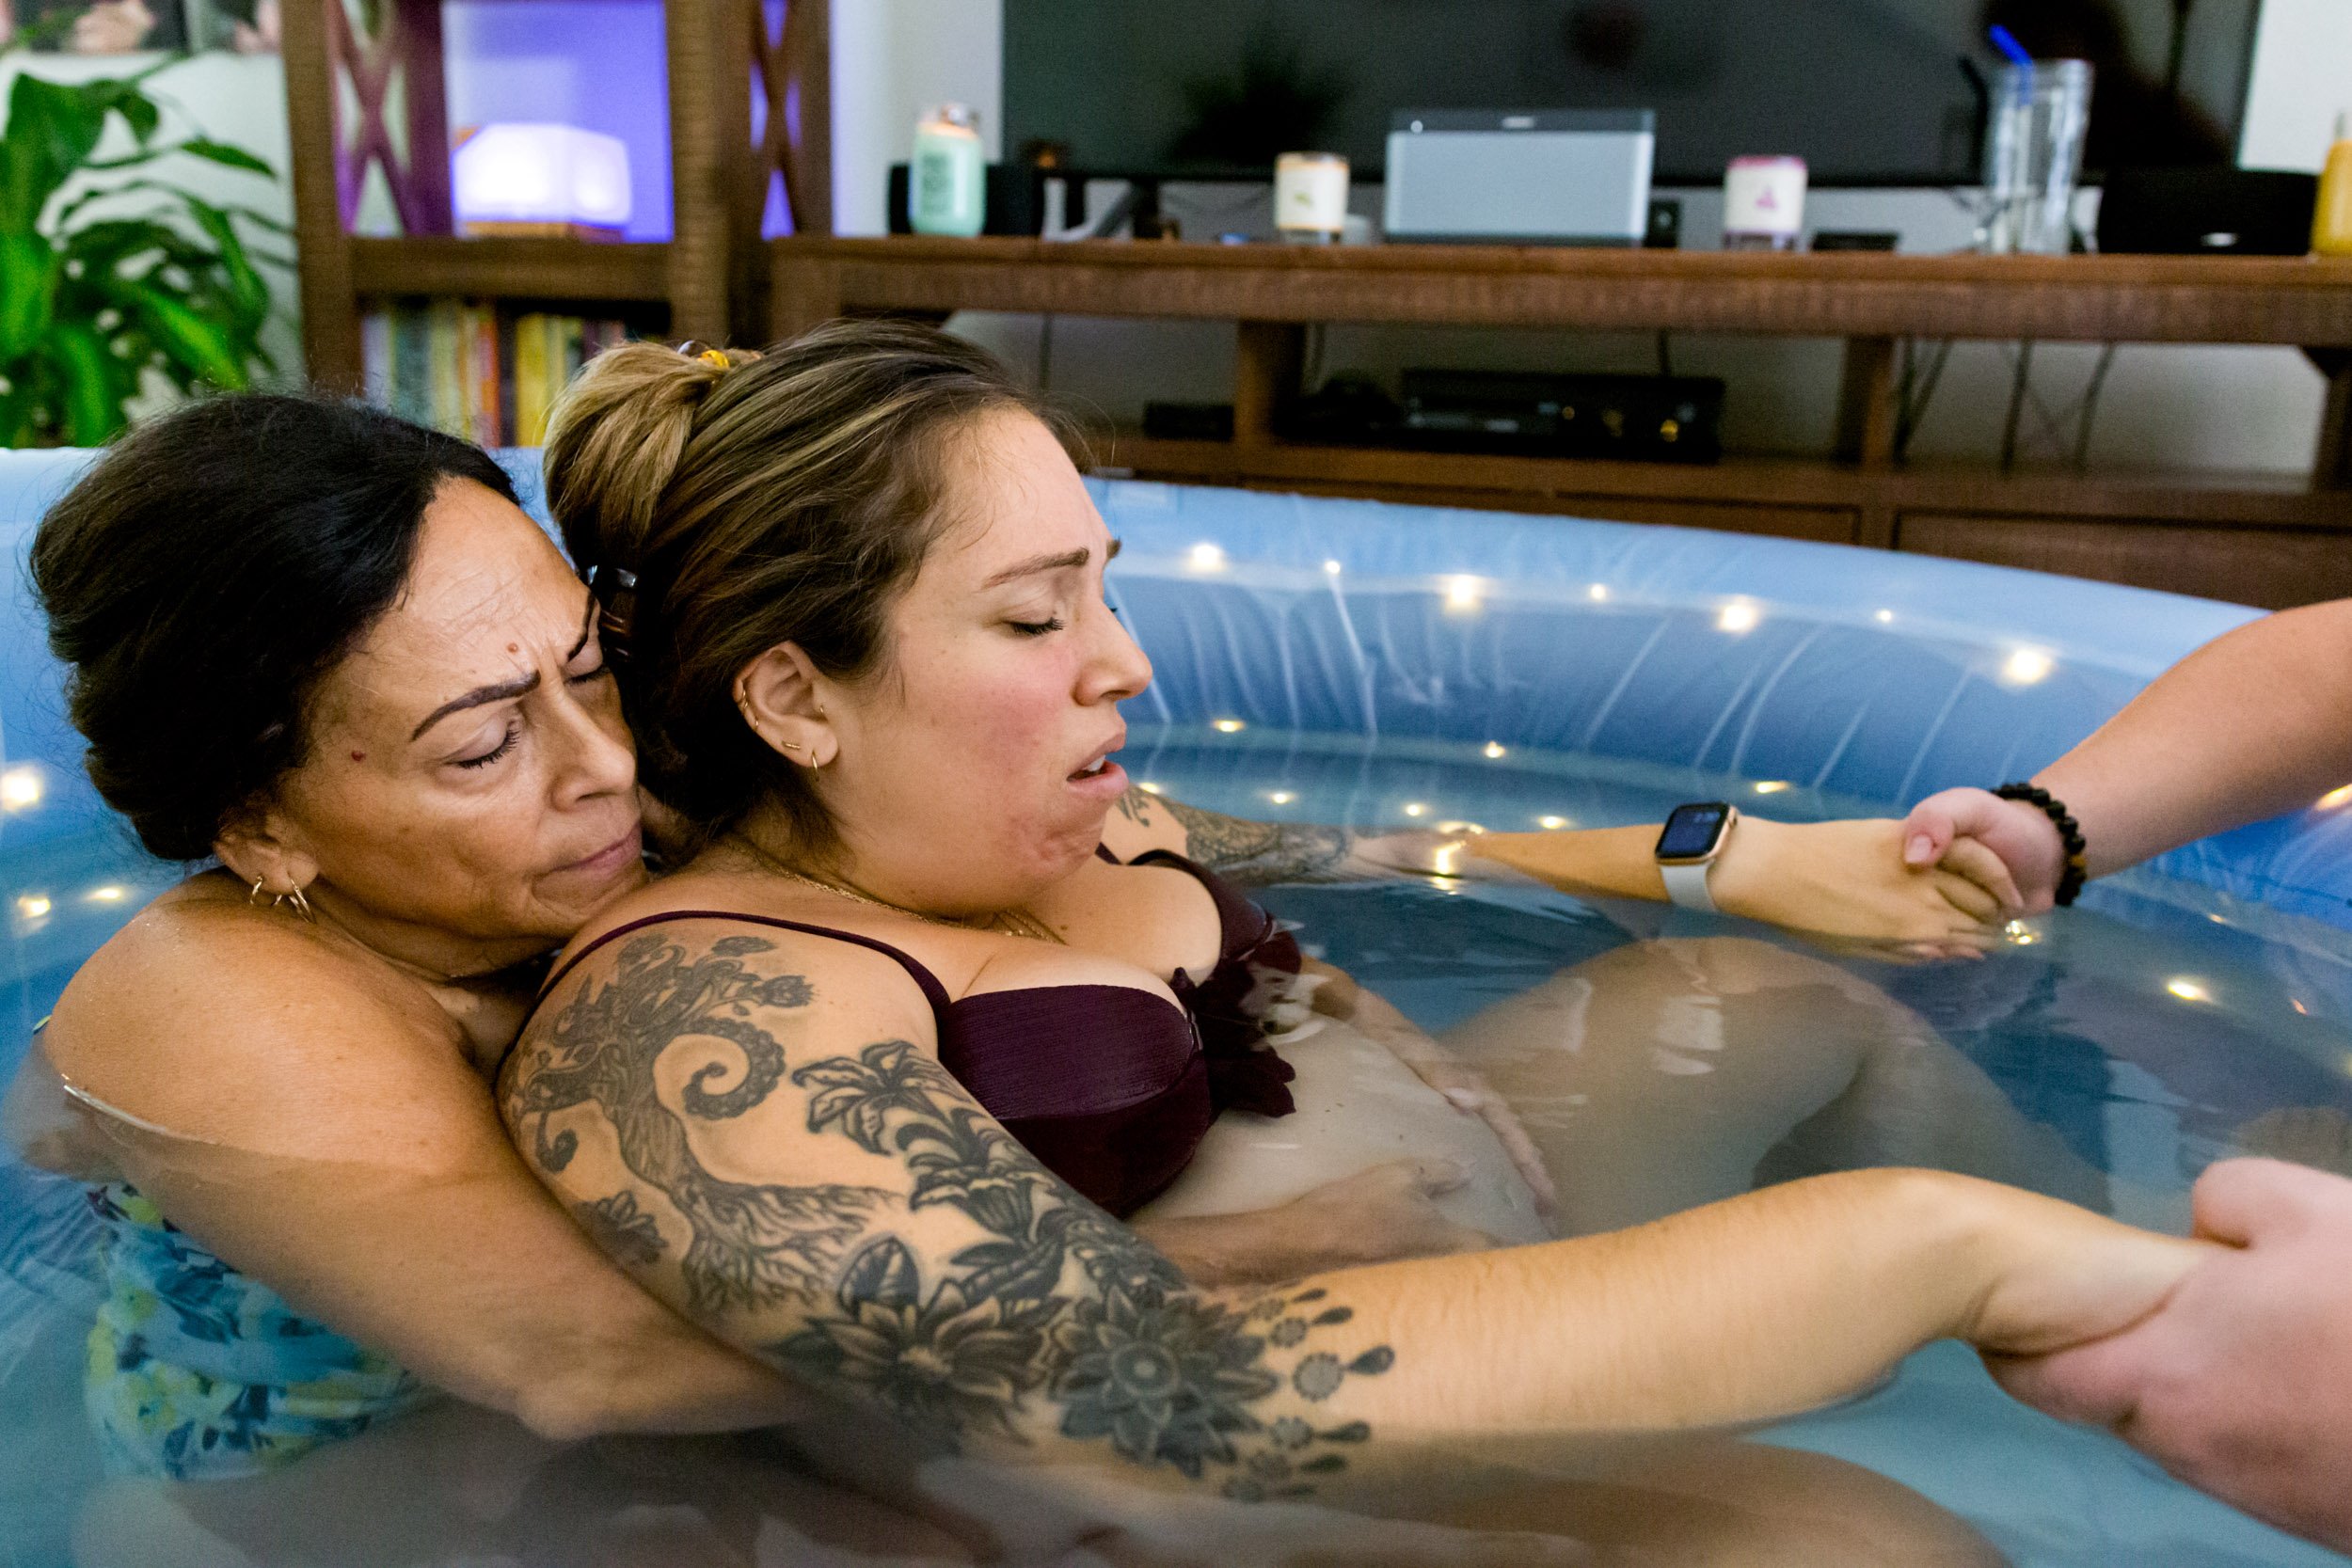 jacksonville home birth mom in birth pool with her mom behind her as her doula